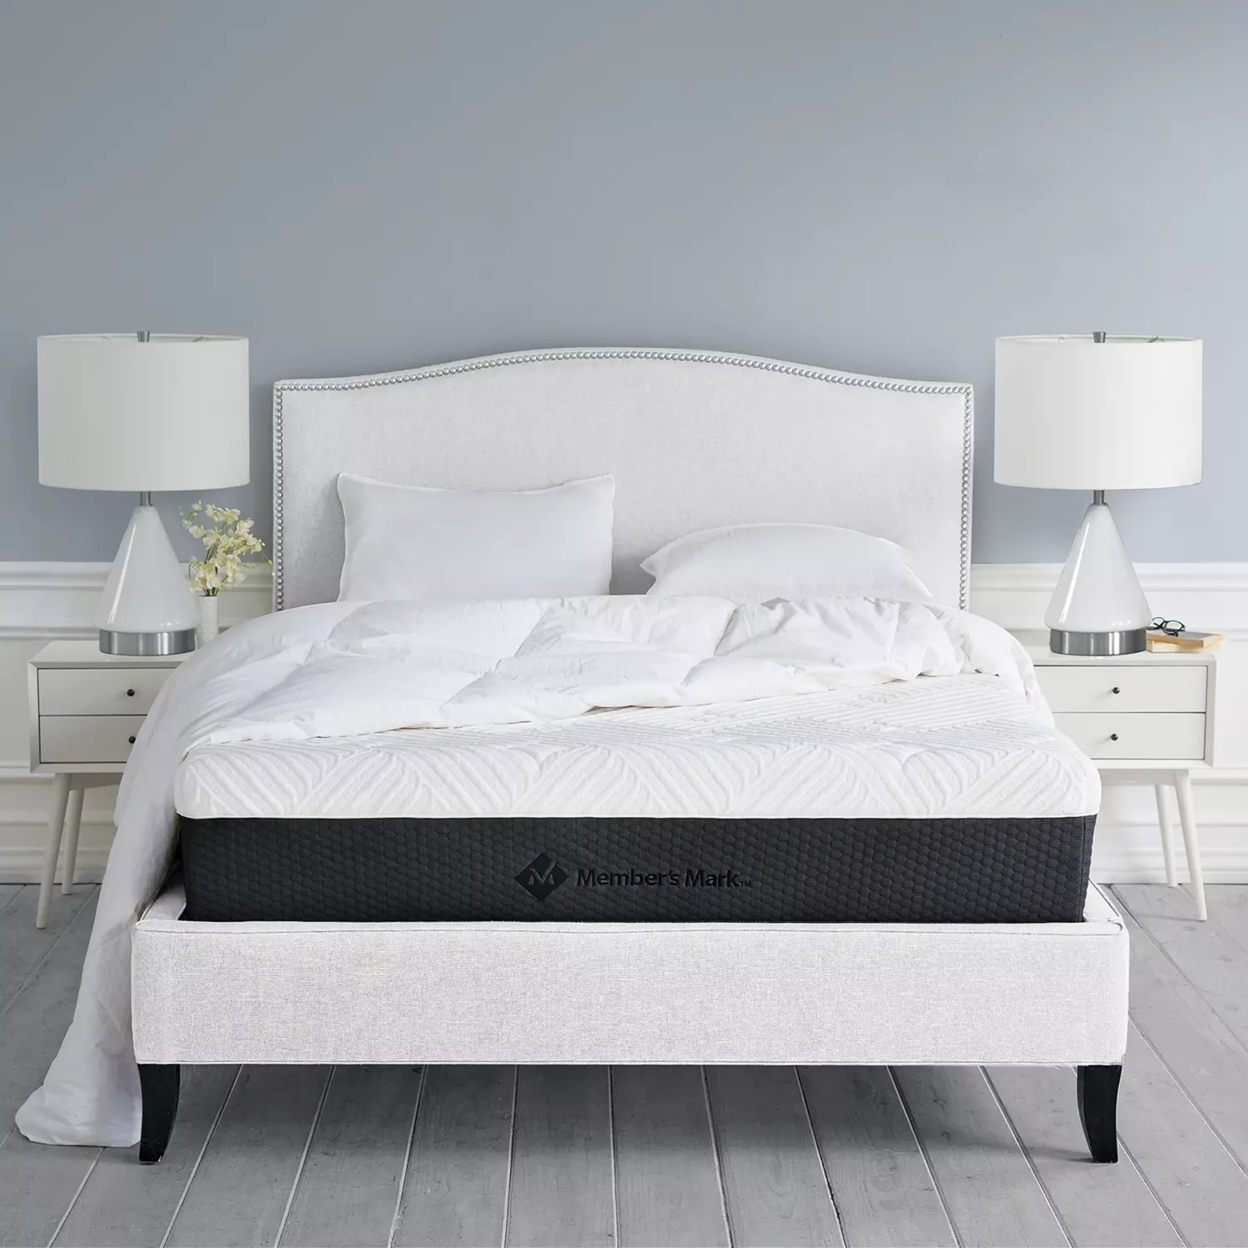 Member's Mark Hotel Premier Collection 12 Mattress, Twin